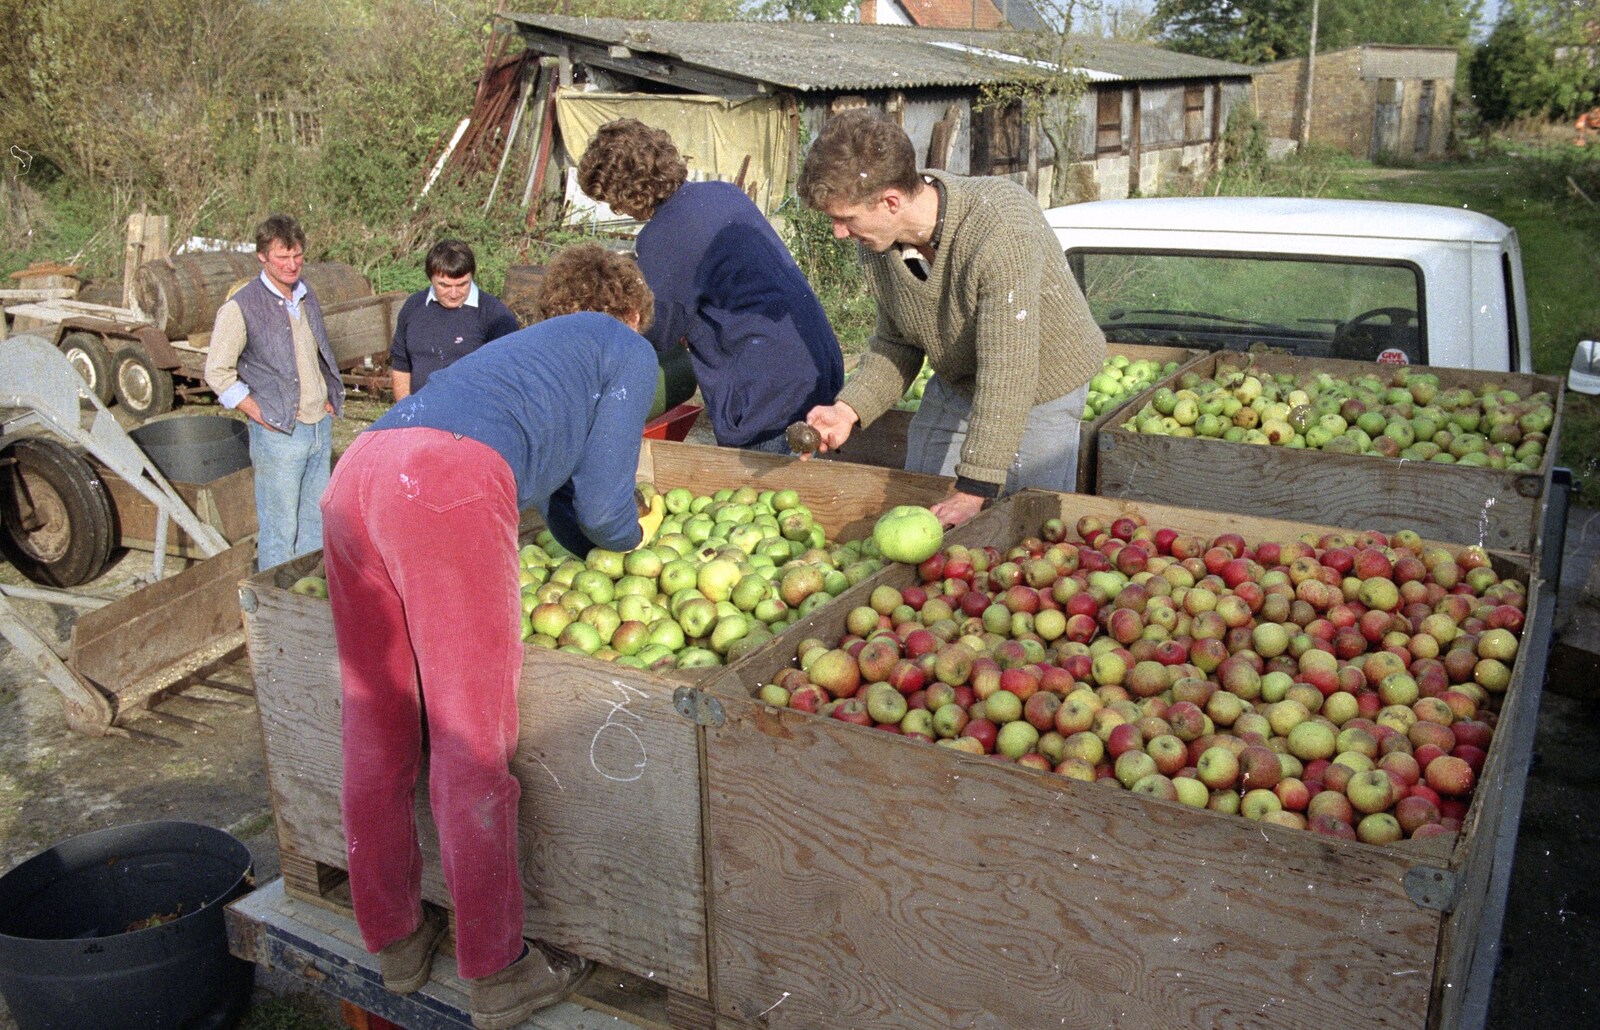 Brenda rummages through apples from The Annual Cider Making Event, Stuston, Suffolk - 11th October 1990